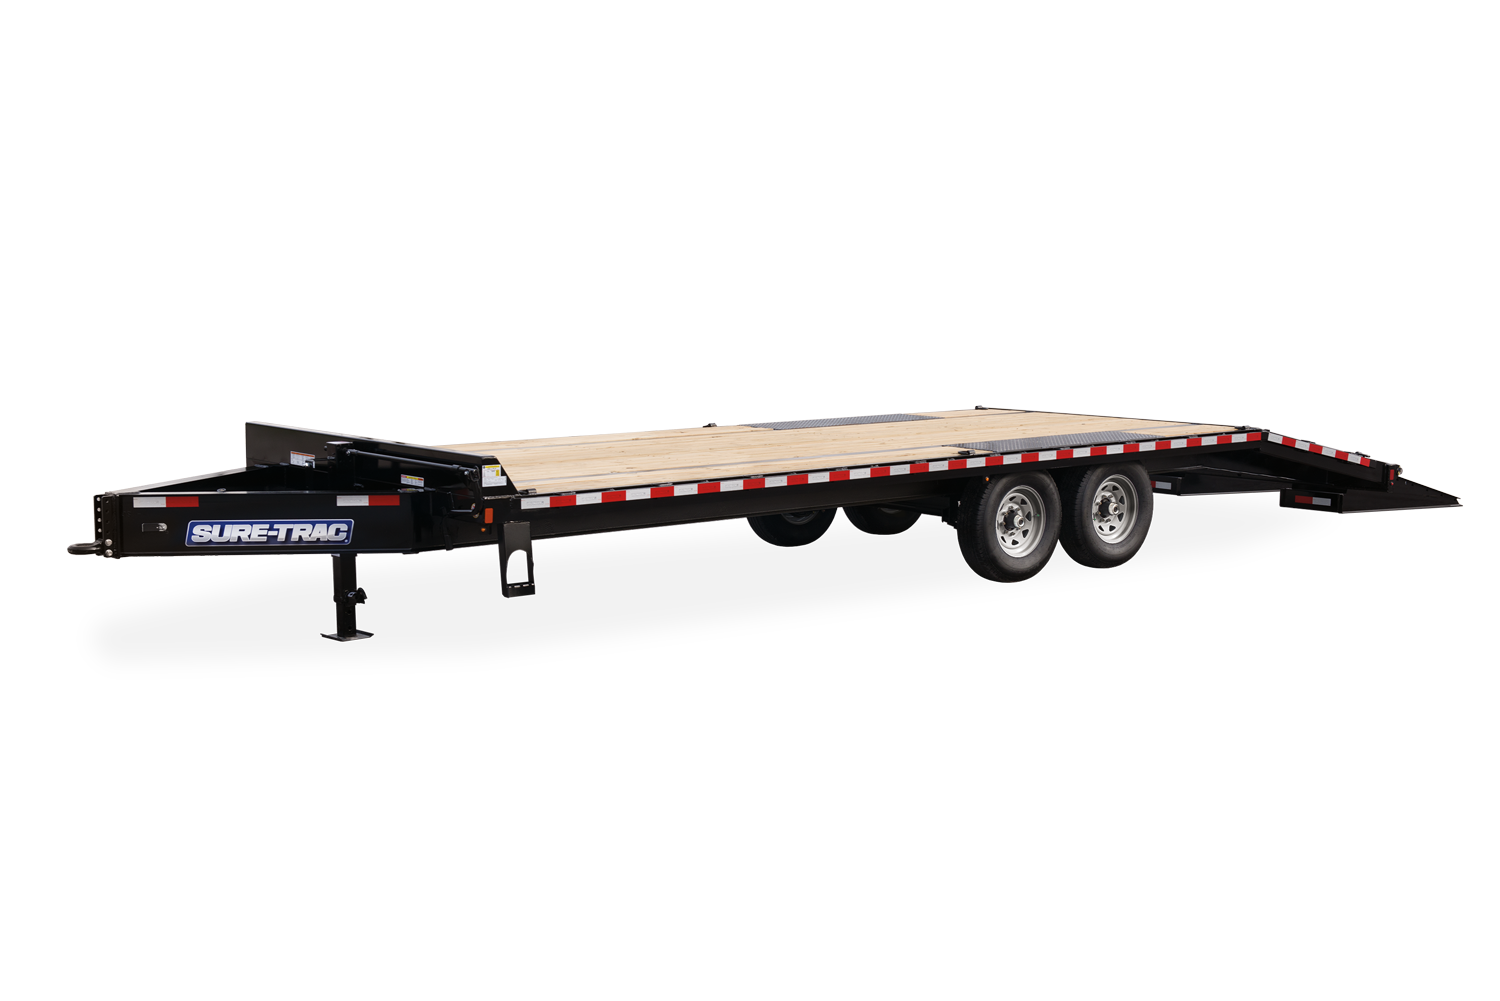 Wide Shot of the 15K Model HD Low Profile Beavertail Deckover